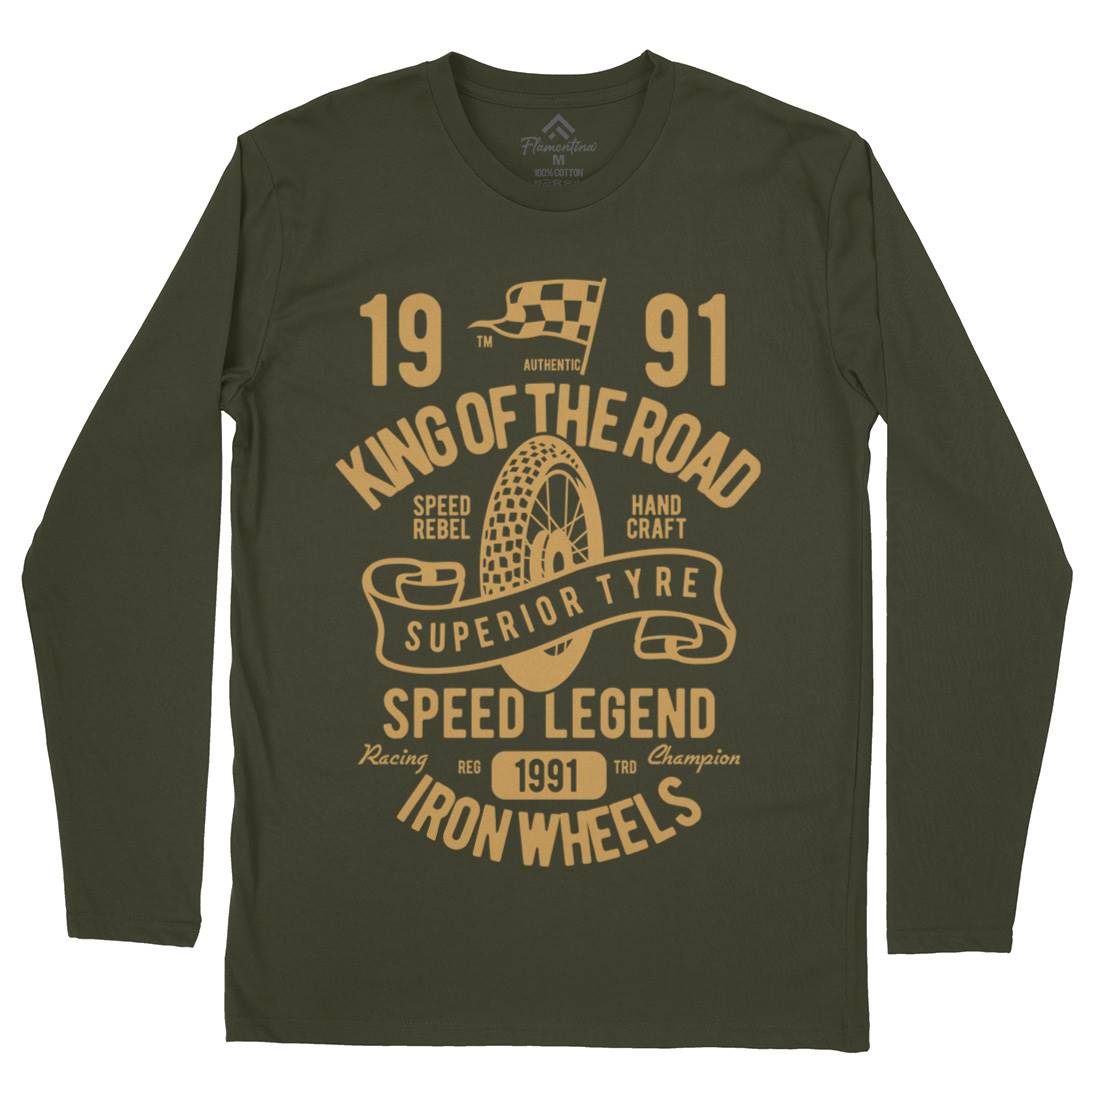 Superior Tyre King Of The Road Mens Long Sleeve T-Shirt Motorcycles B458